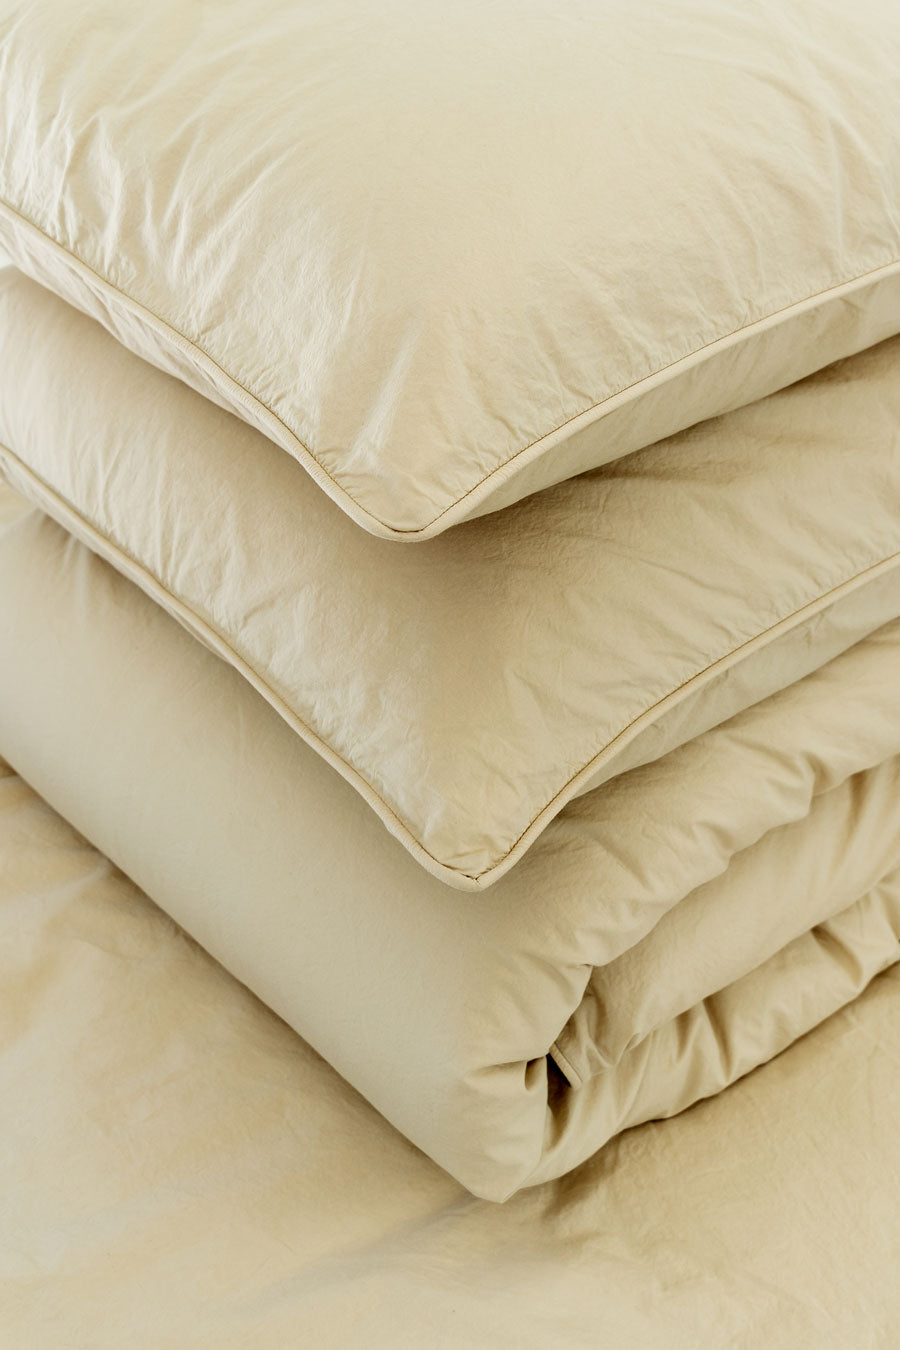 Organic Cotton Percale duvet cover set with a beige duvet cover and two beige pillowcases.